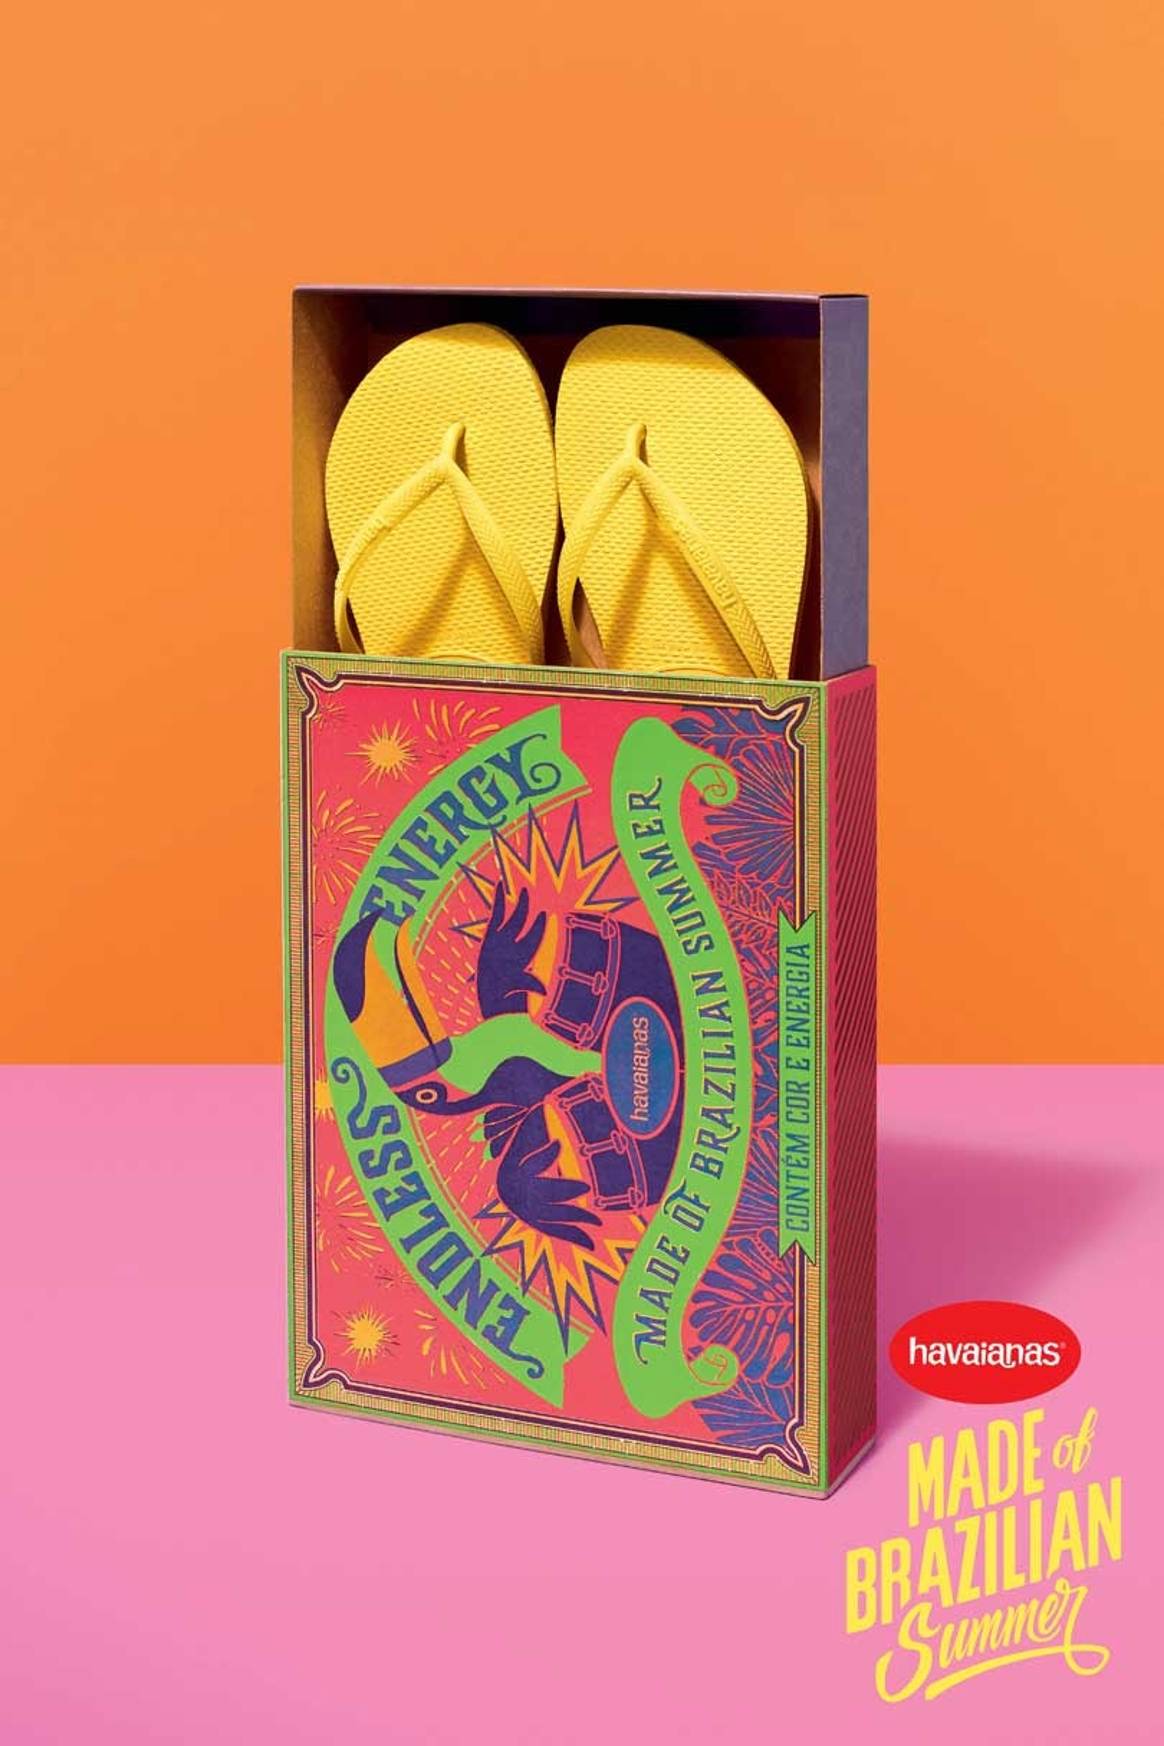 Havaianas: Dressing you from ‘toe to head’